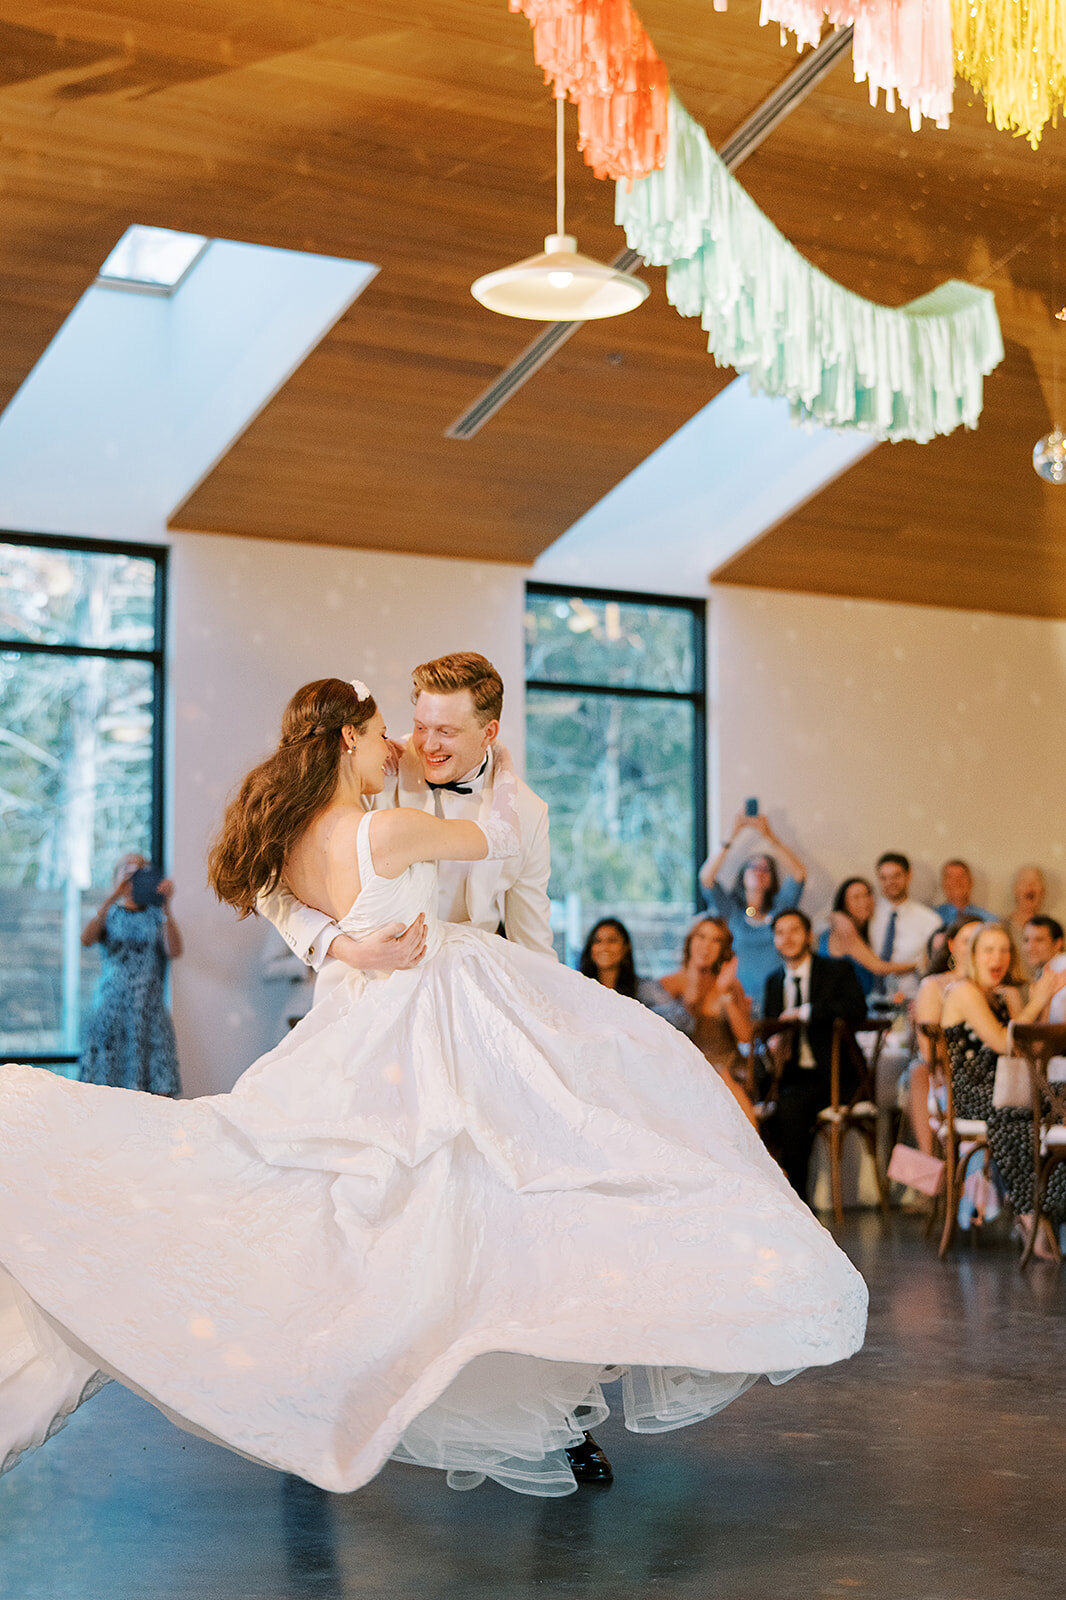 The groom swings his bride around in his arms for their first dance in the modern reception space at The Grand lady